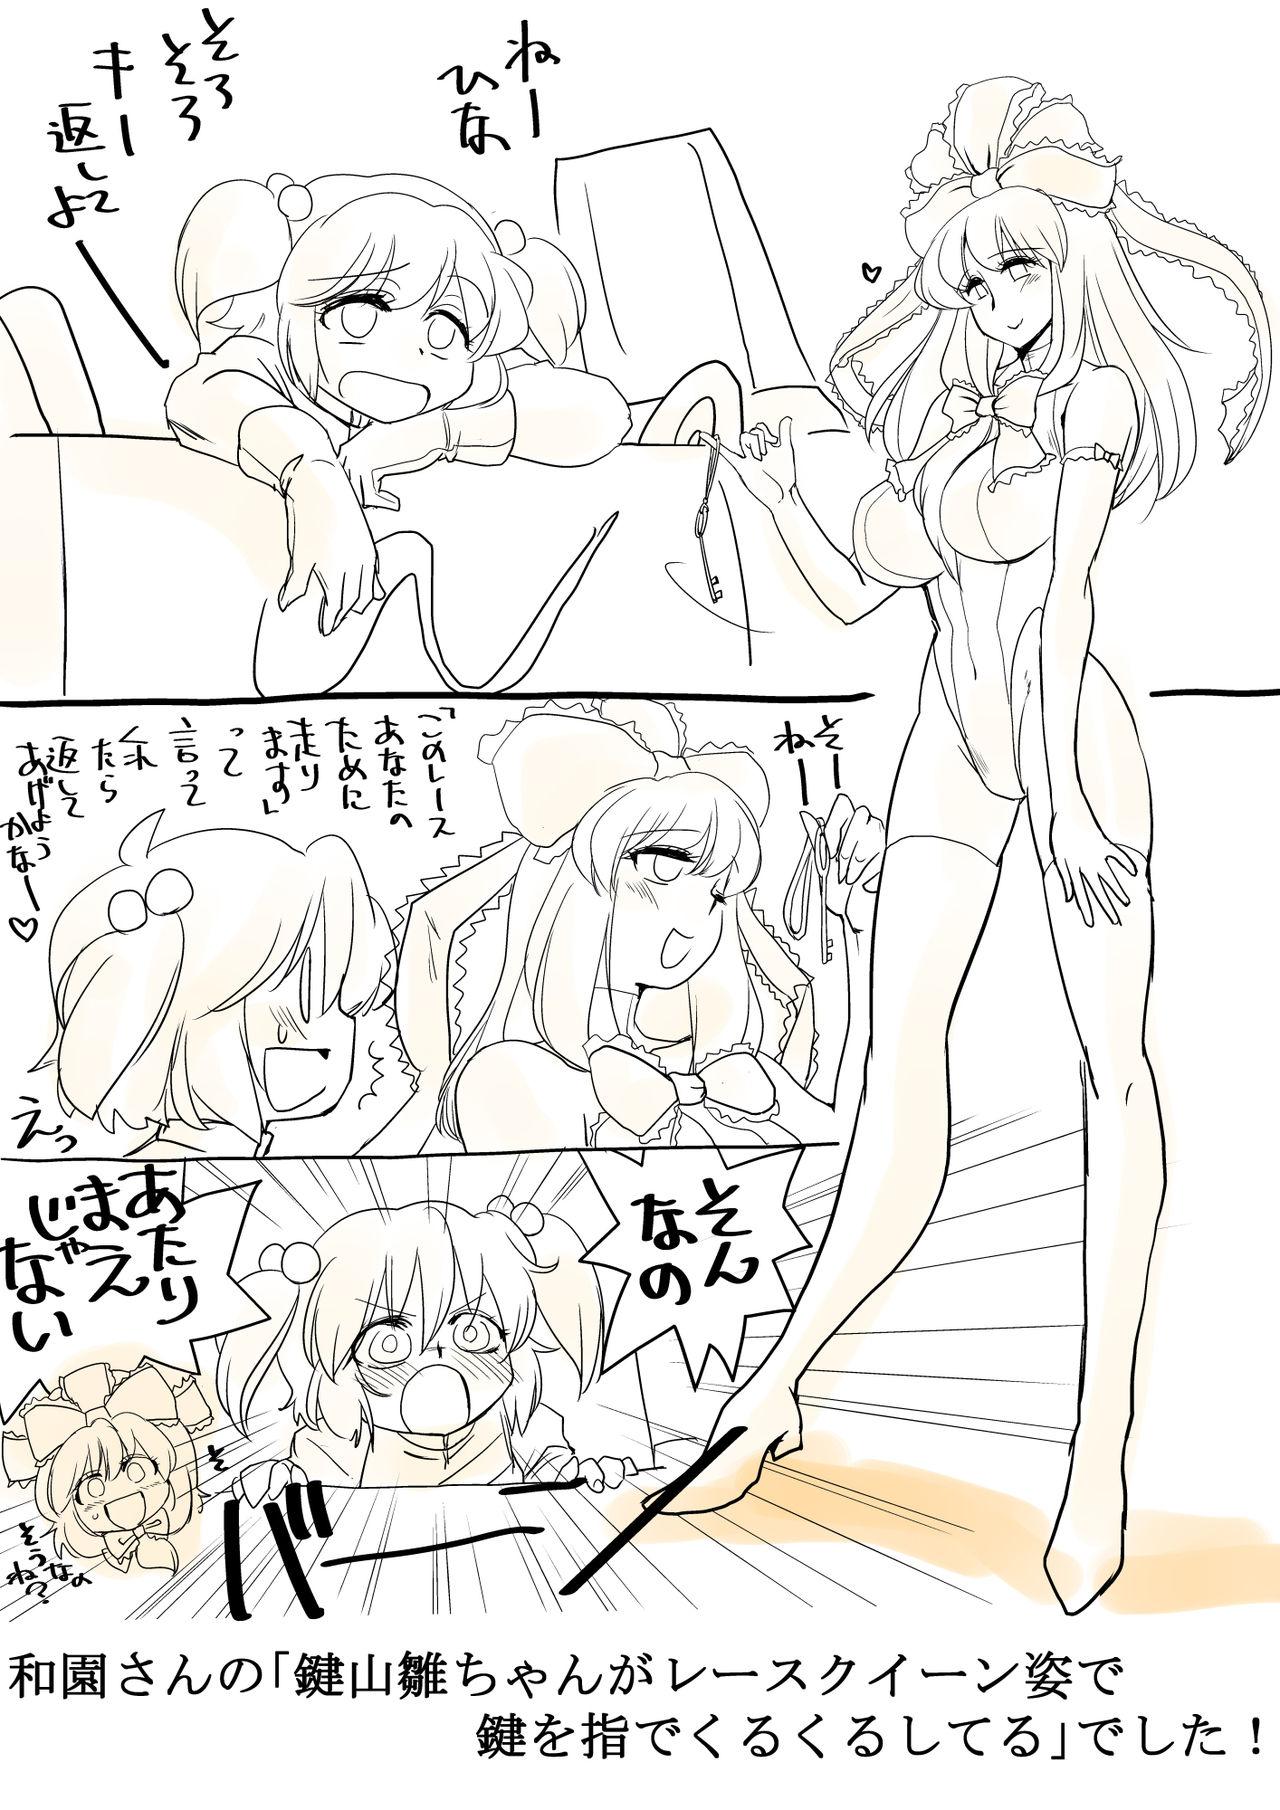 Office Touhou Request CG Shuu Sono 2 - Touhou project Indian - Page 8